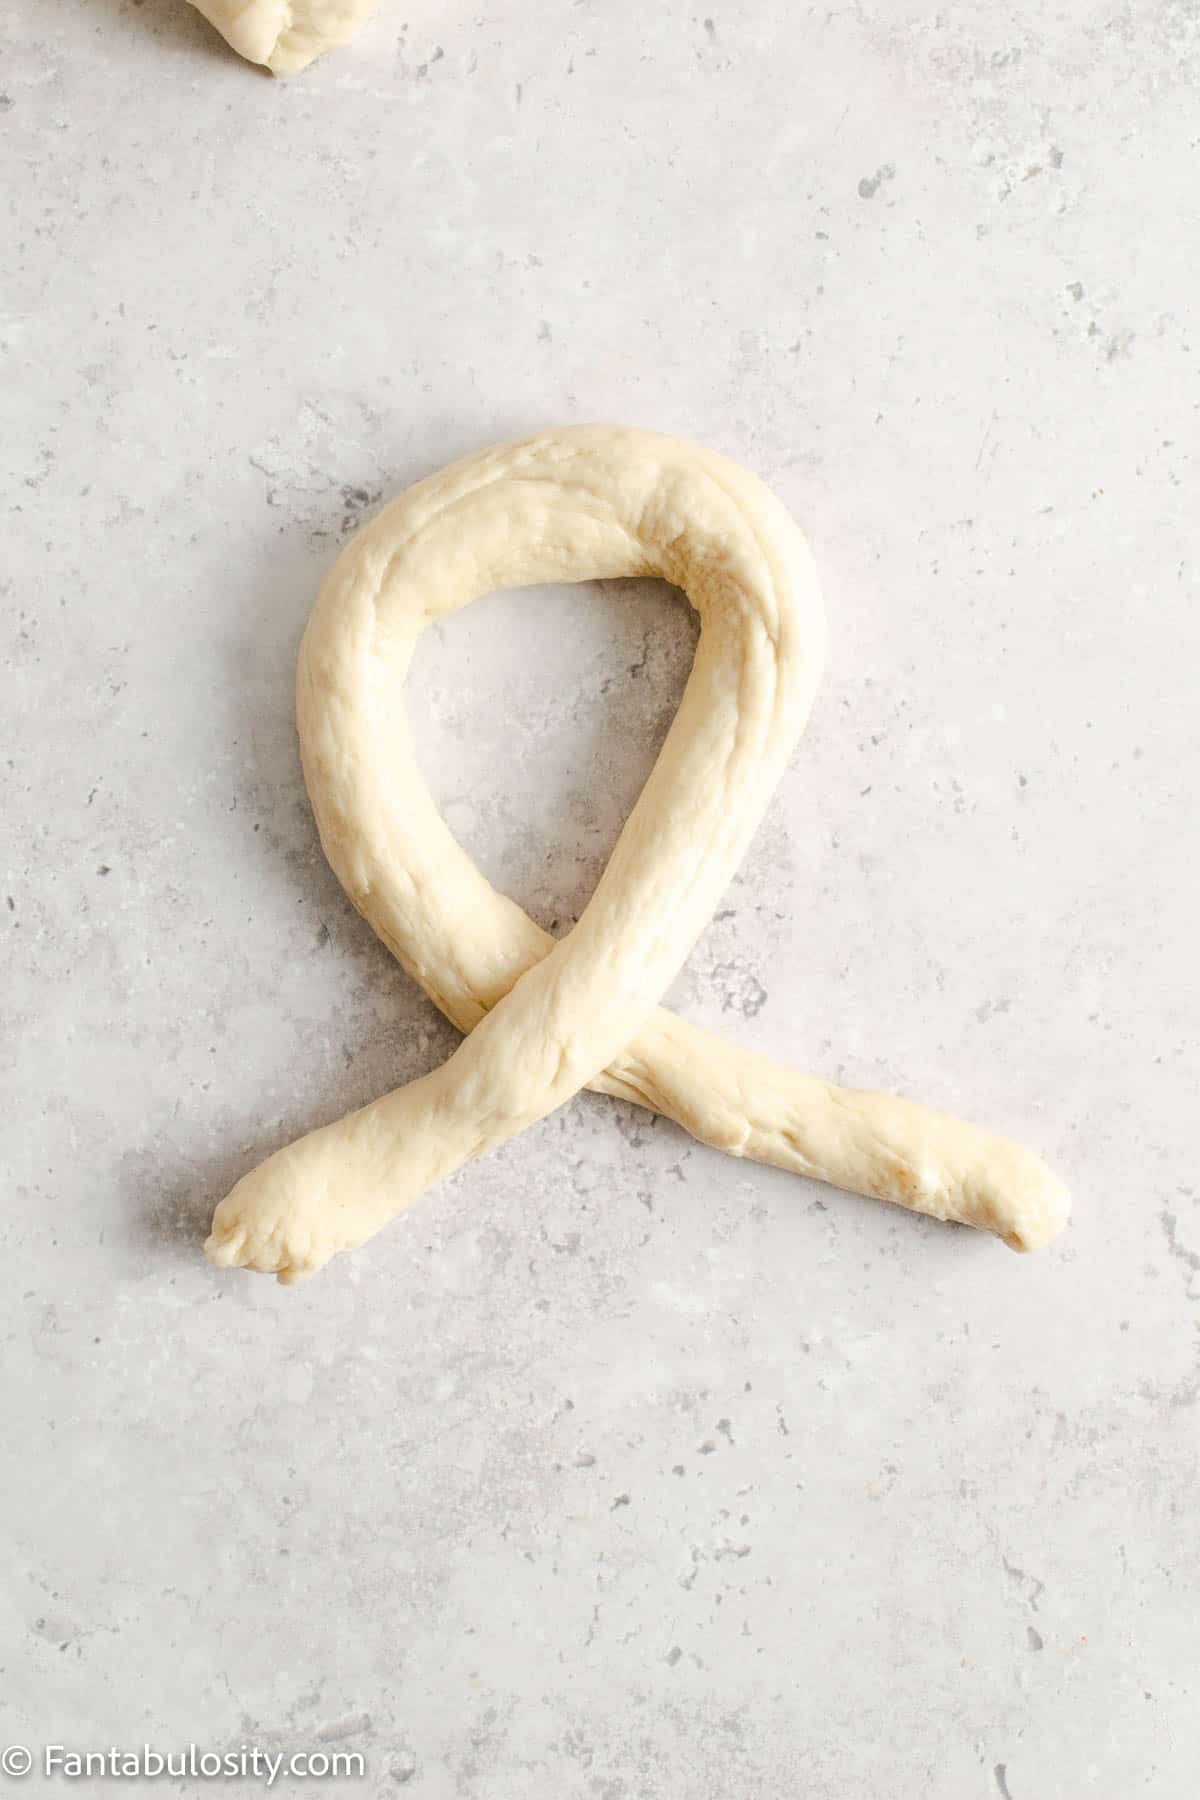 Pretzel dough with tails crossed over each other.